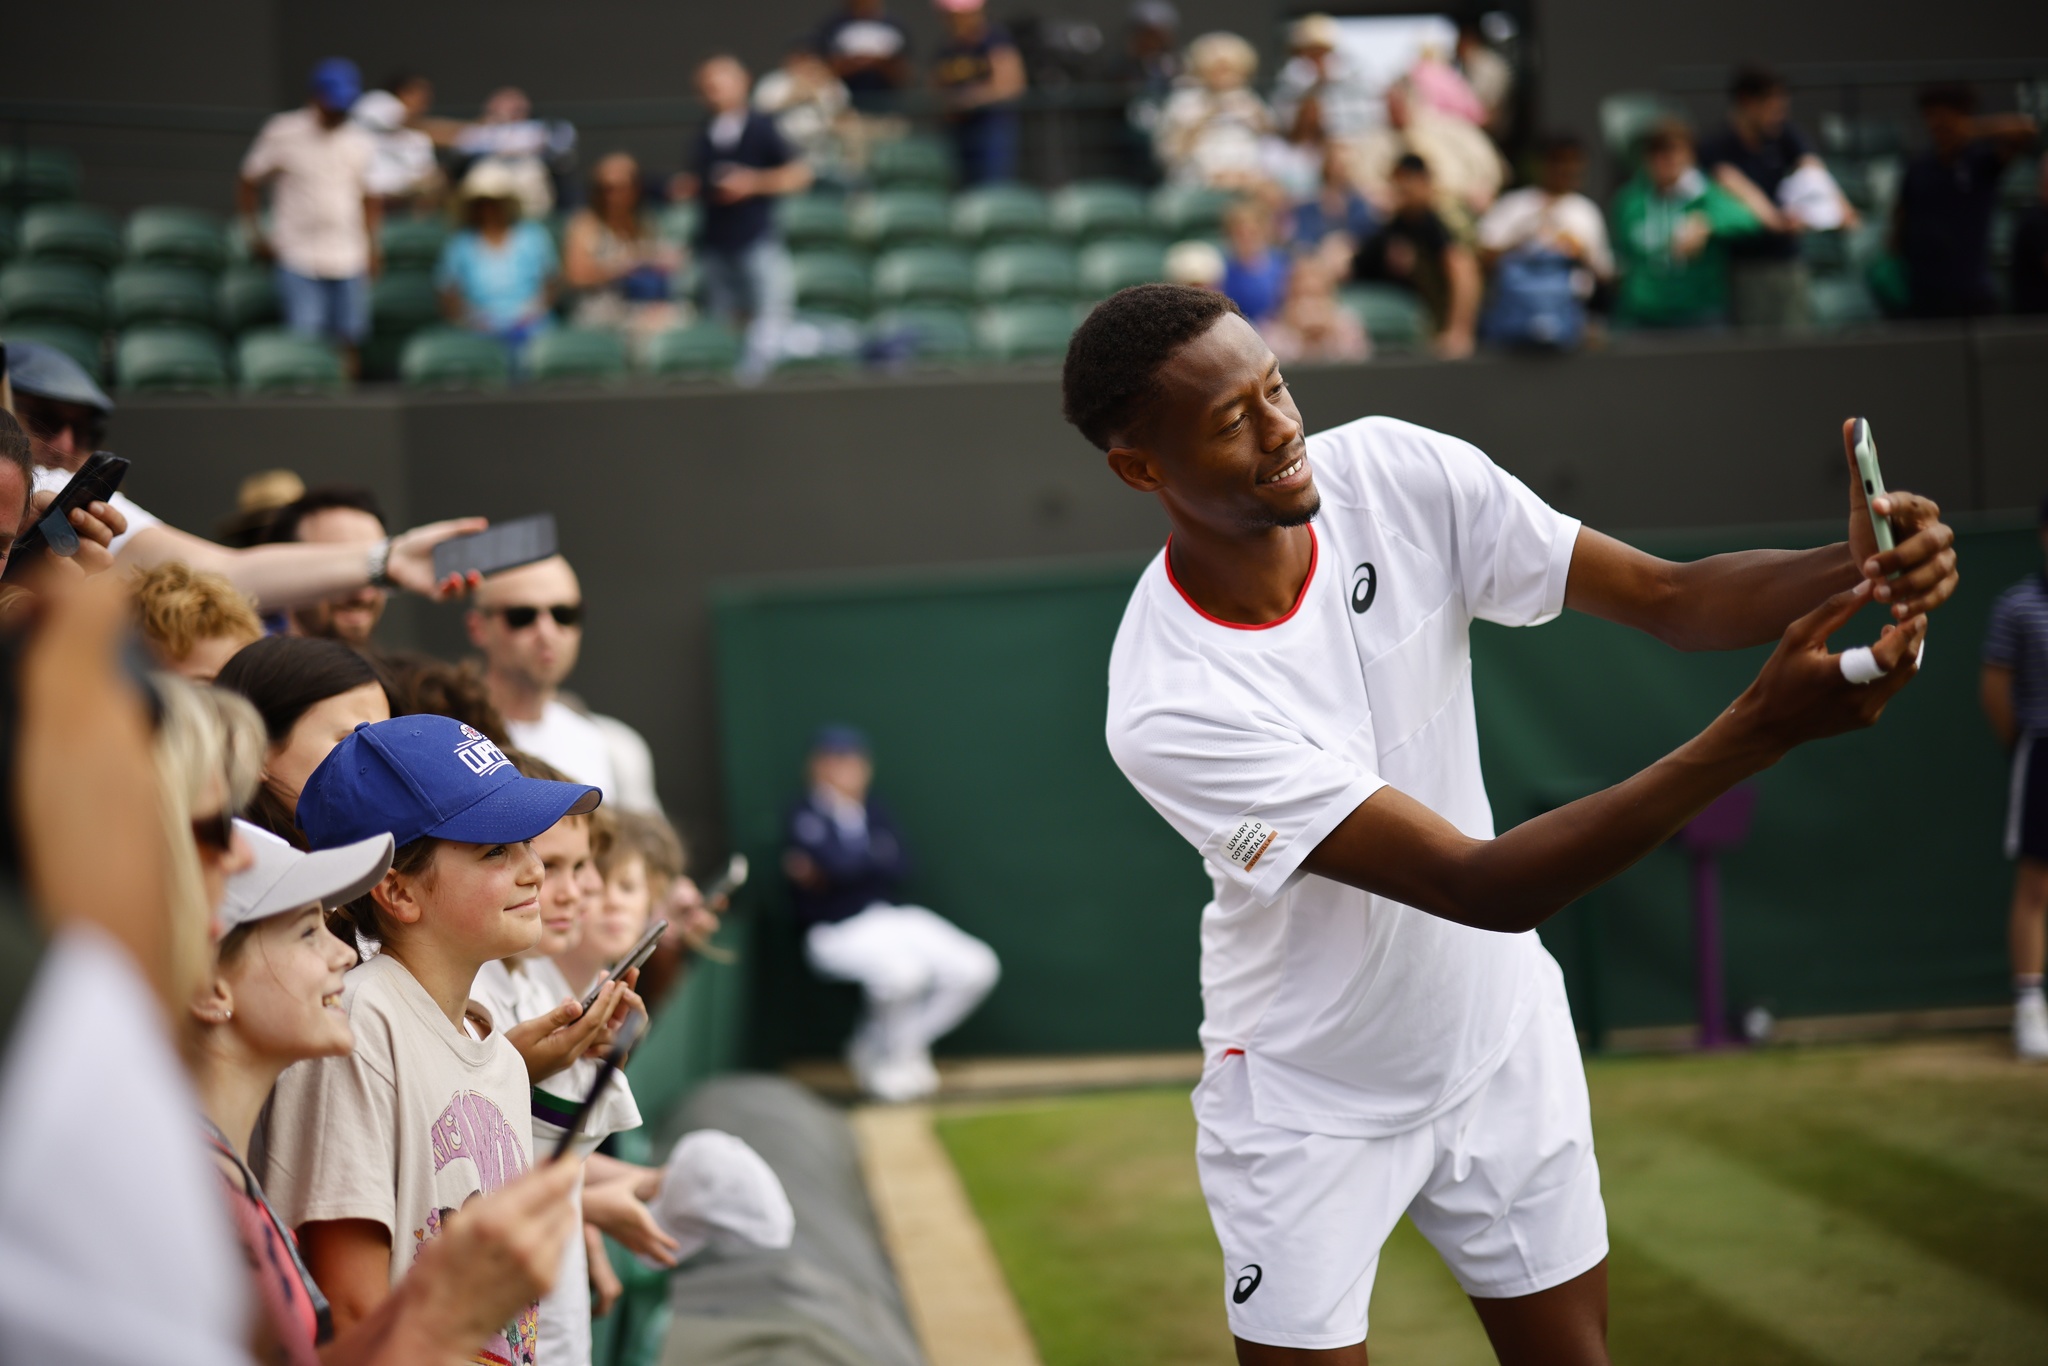 Christopher Eubanks poses for selfies with fans